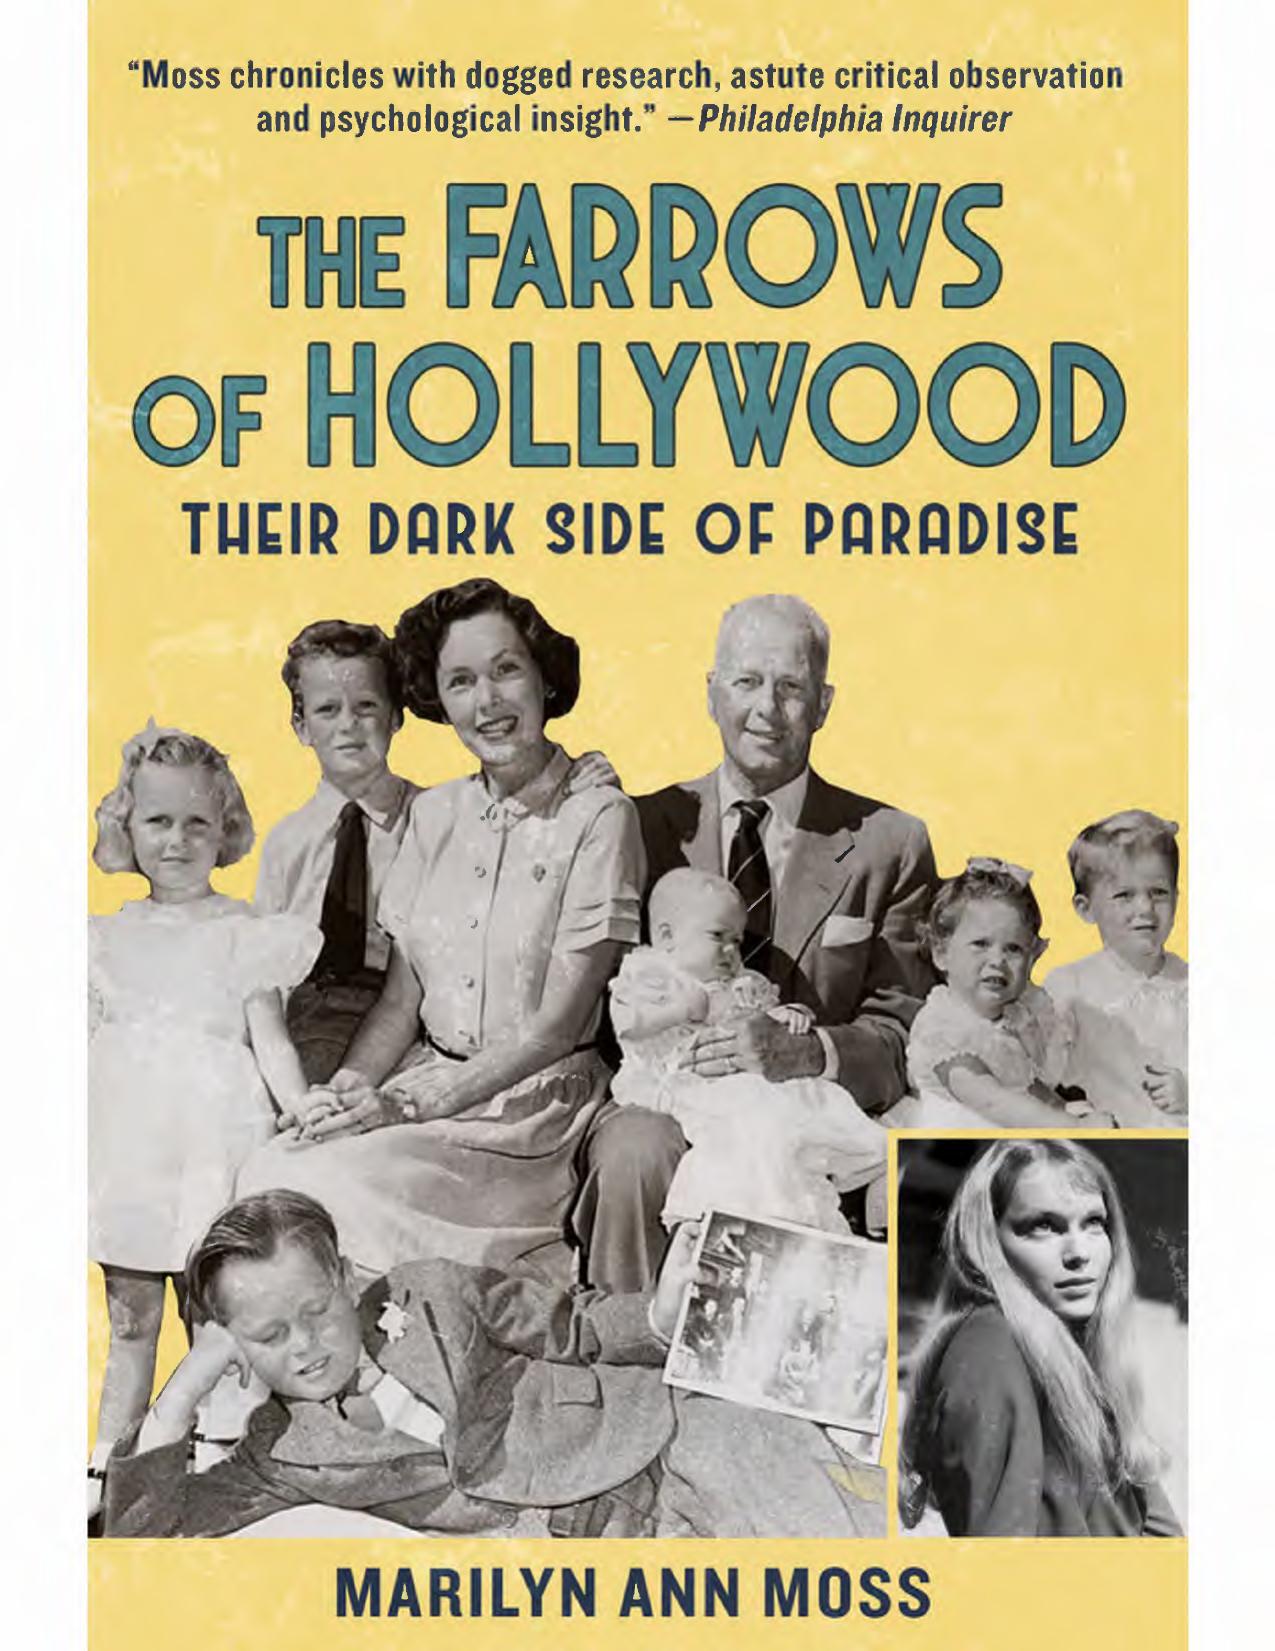 The Farrows of Hollywood - Their Dark Side of Paradise by Marilyn Ann Moss